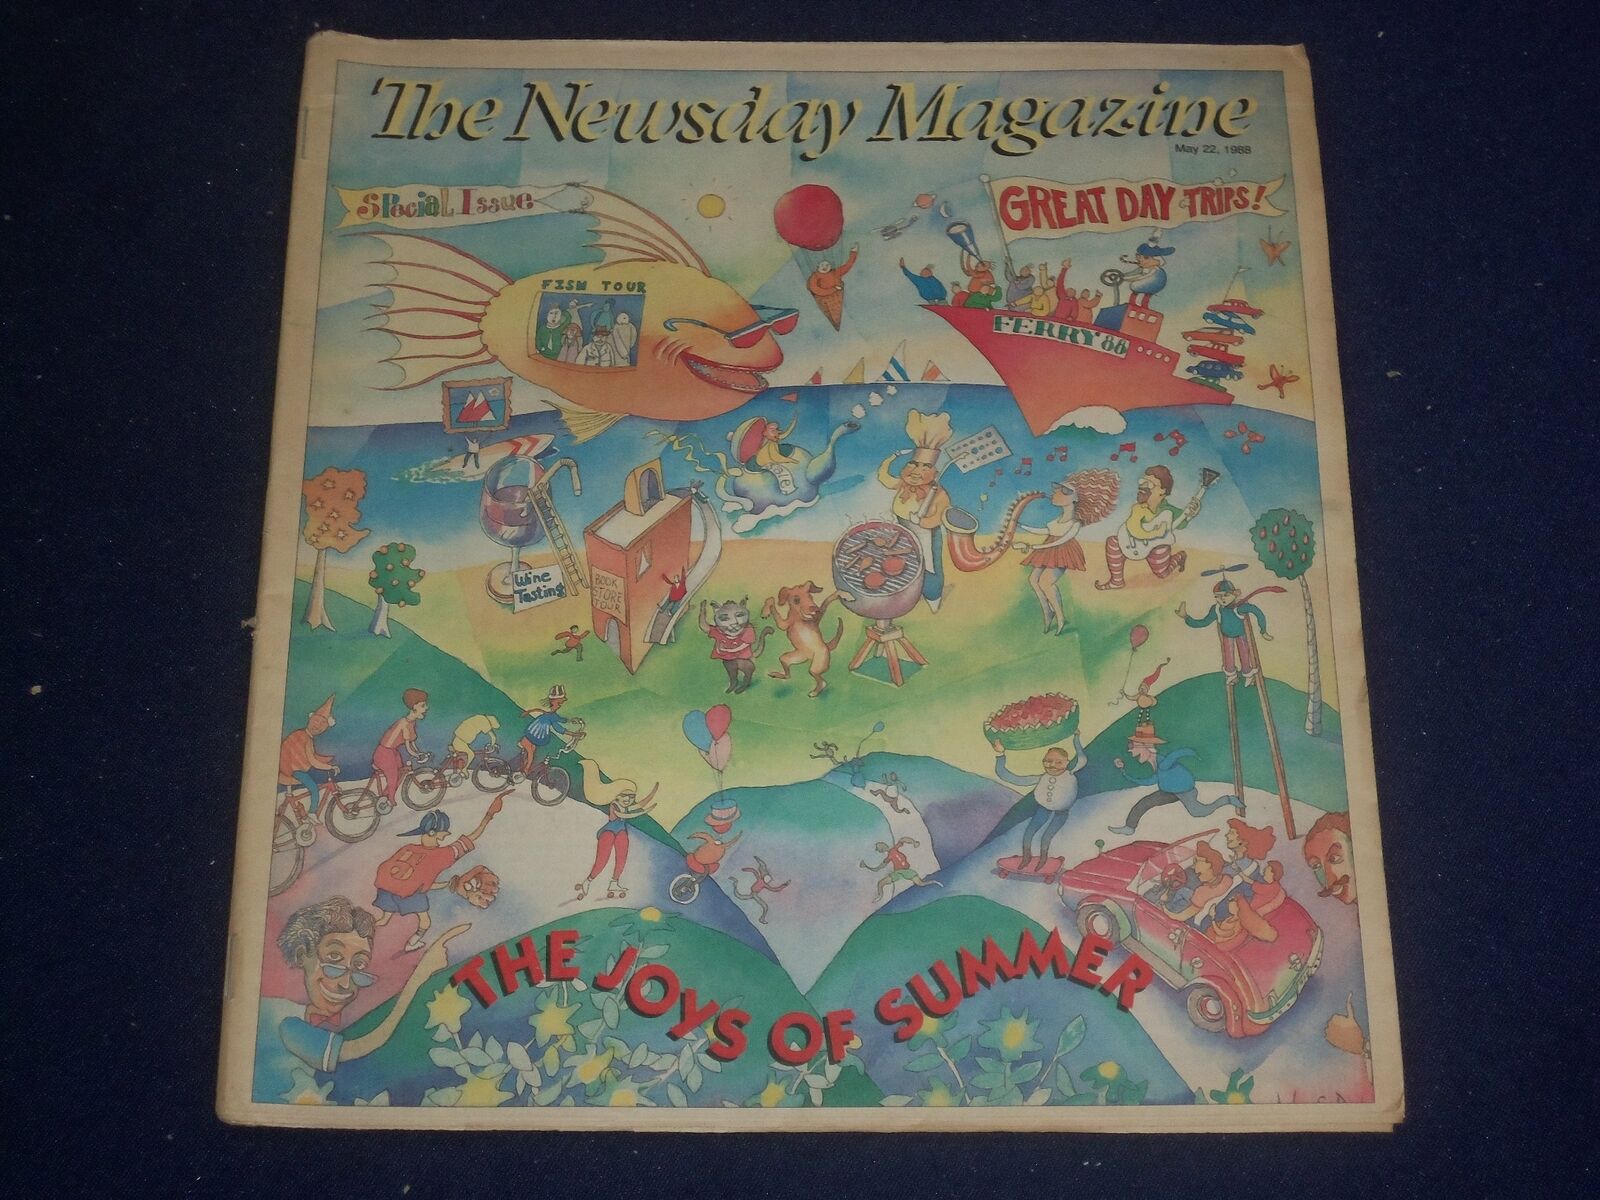 1988 MAY 22 THE NEWSDAY MAGAZINE - THE JOYS OF SUMMER - ST 6436